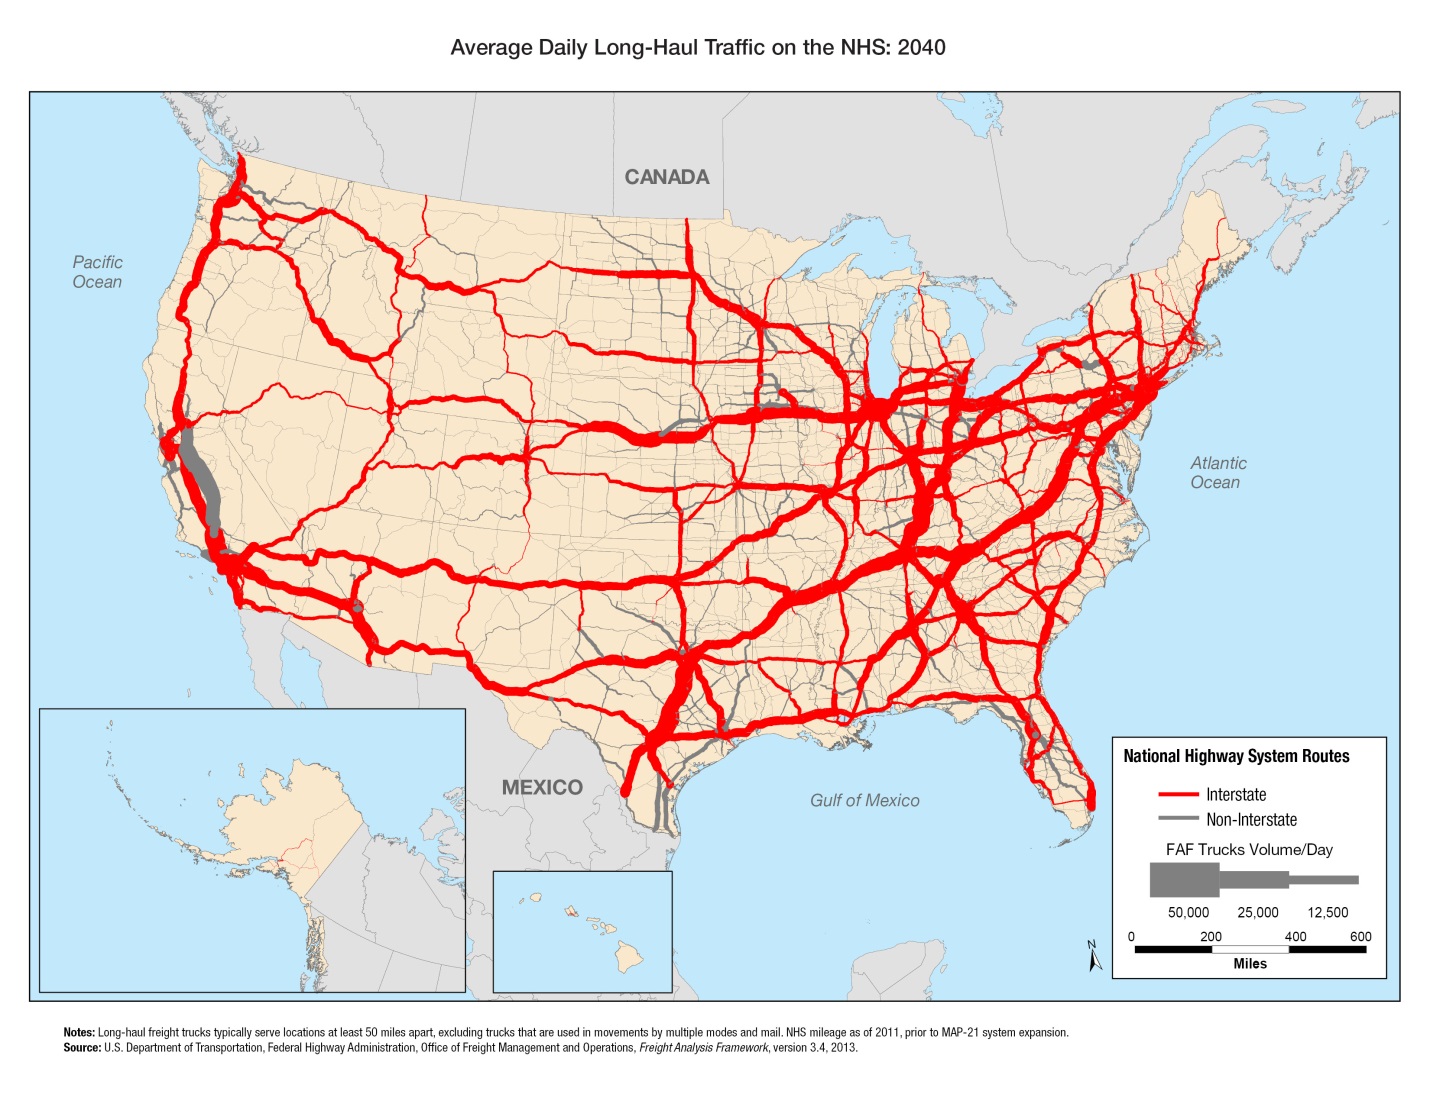 An outline map of the 48 contiguous states and insets for Alaska and Hawaii show the interstate and non-interstate routes for freight on the National Highway System. Freight volume is indicated by line thickness for 50,000 trucks per day, 25,000 trucks per day, and 12,500 trucks per day. The interstates with the highest volume run from Massachusetts to Texas, to Oklahoma, through the Midwest to southern California, as well as to the Great Lakes states across the Great Plains states to the Pacific coast. The routes with 25,000 trucks per day are shown in the northern states between the Midwest and the Pacific Coast and through the Central Plains through Nevada and into California. The interstate routes with the lowest volume run north-south along the Rocky Mountains, in Texas, and along the eastern border of North and South Dakota. The non-interstate routes have the highest volume in California and the non-interstate routes with 25,000 trucks per day are shown in the Midwestern states as well as Florida and Texas. Sources: U.S. Department of Transportation, Federal Highway Administration, Office of Freight Management and Operations, Freight Analysis Framework, Version 3.4, 2013.